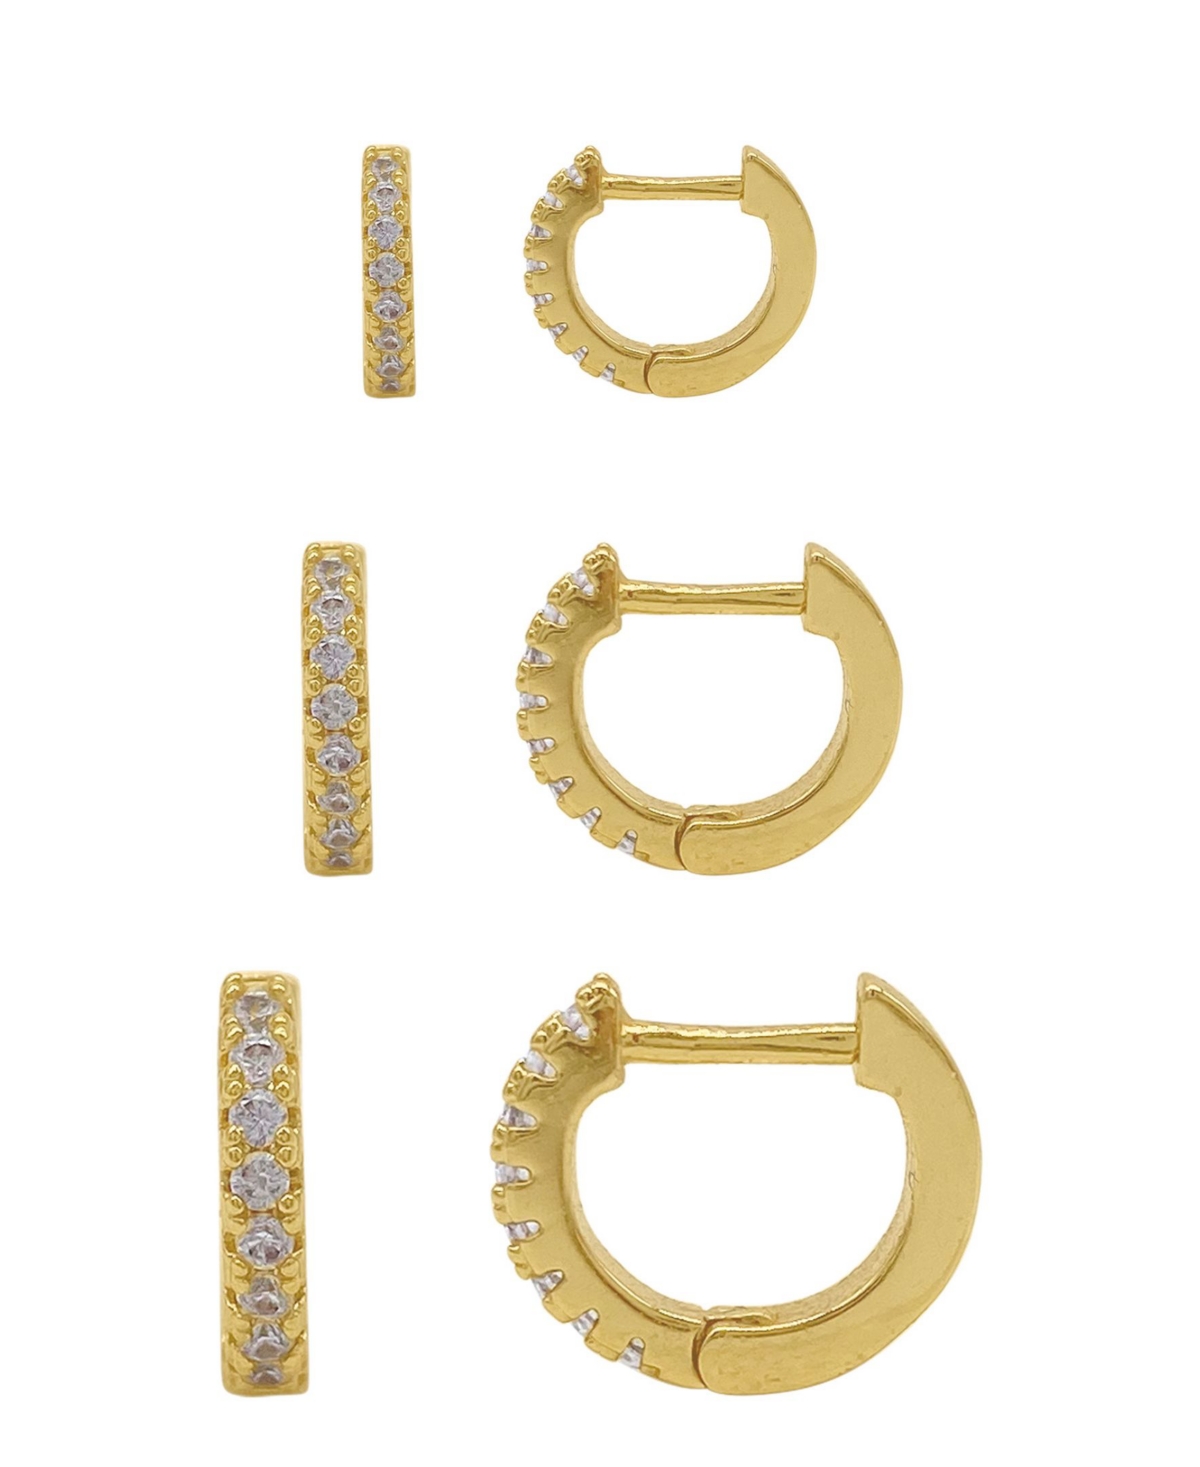 Shop Adornia 14k Gold Plated Huggie Hoop Earring Pack, 6 Pieces